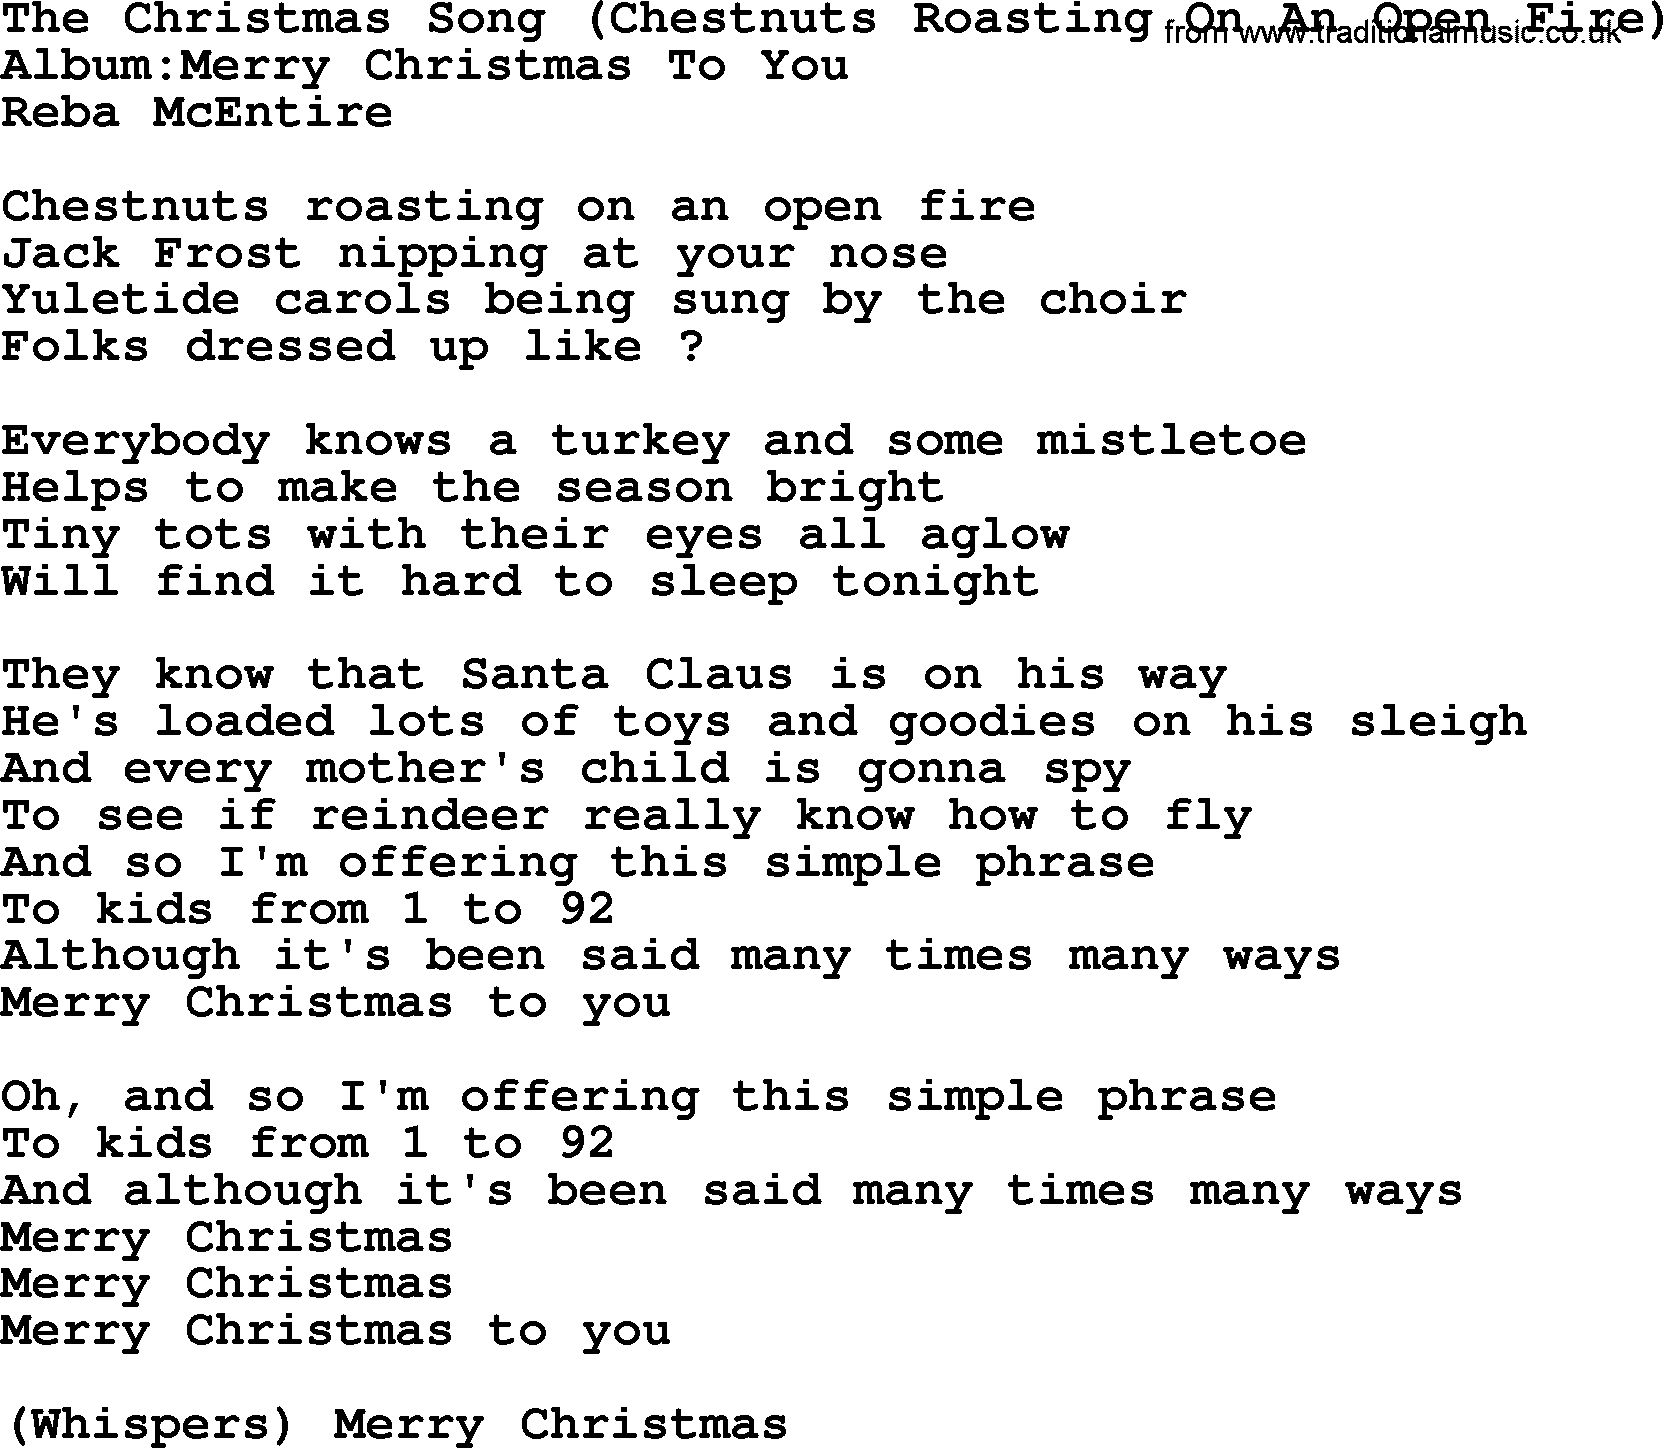 Reba McEntire song: The Christmas Song, Chestnuts Roasting On An Open Fire lyrics